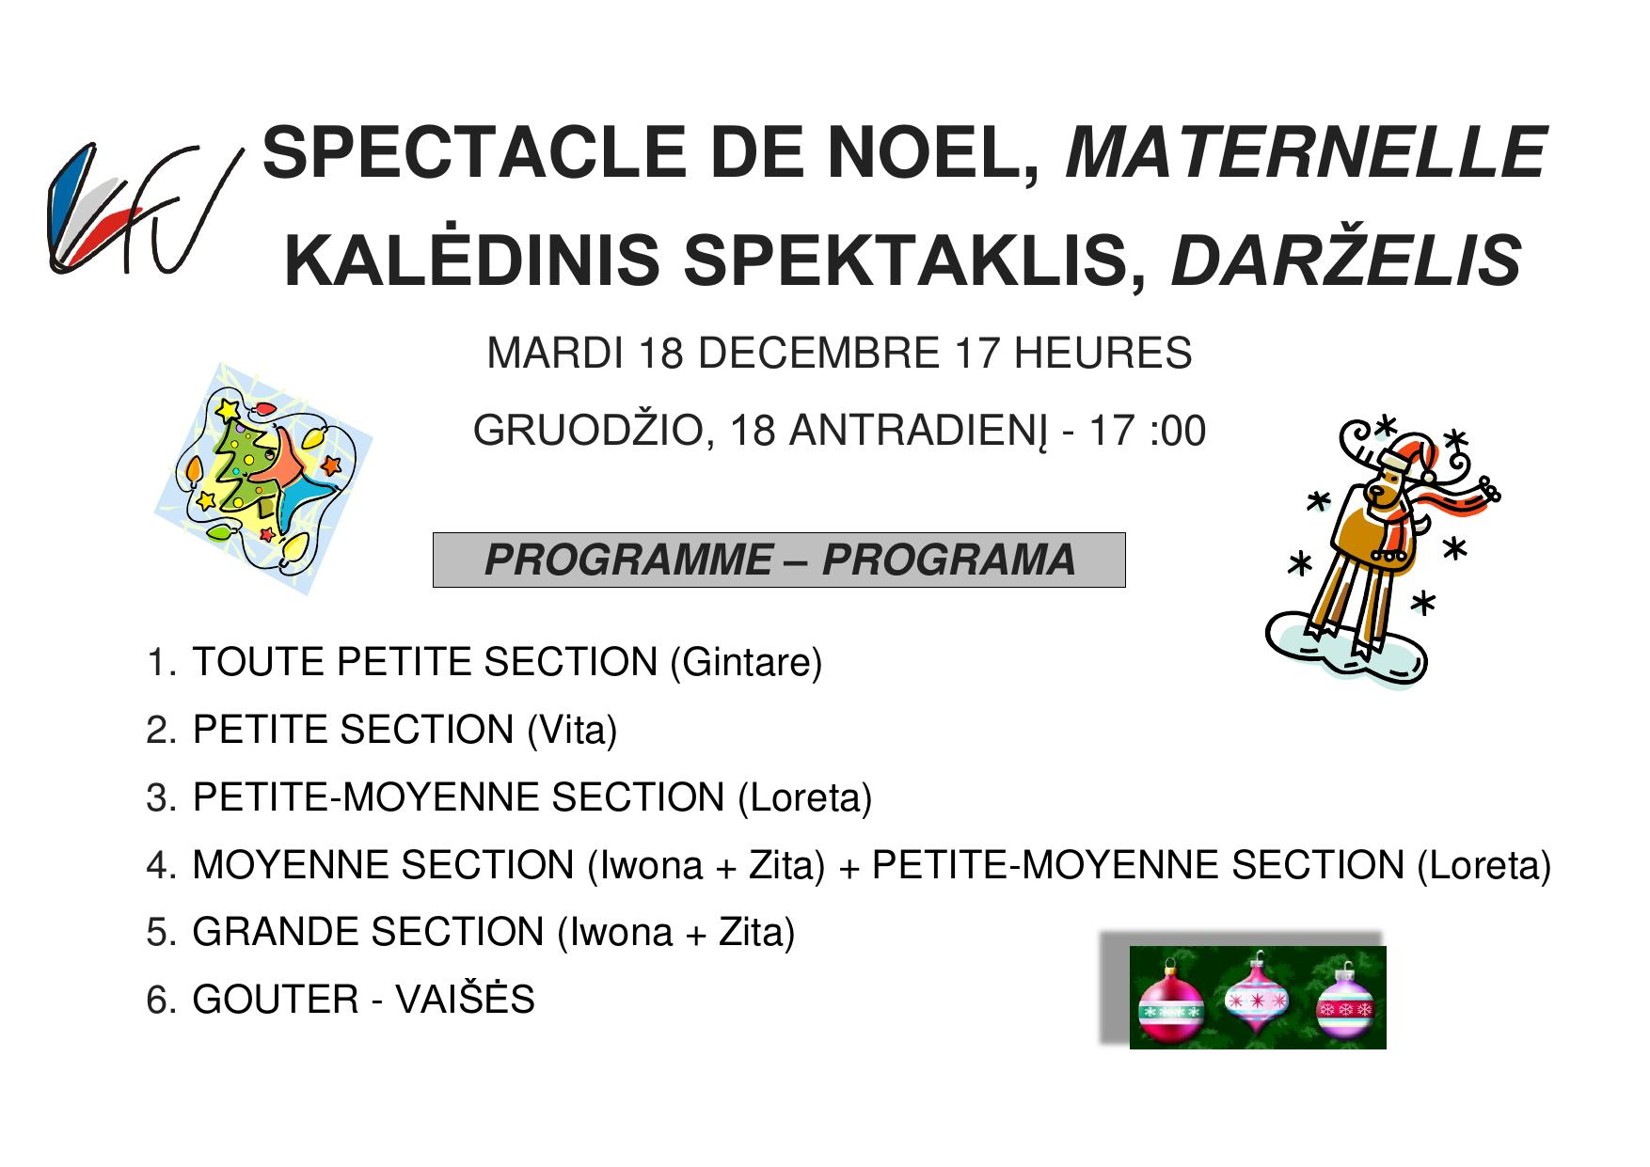 SPECTACLE MATERNELLE 18 12 2012